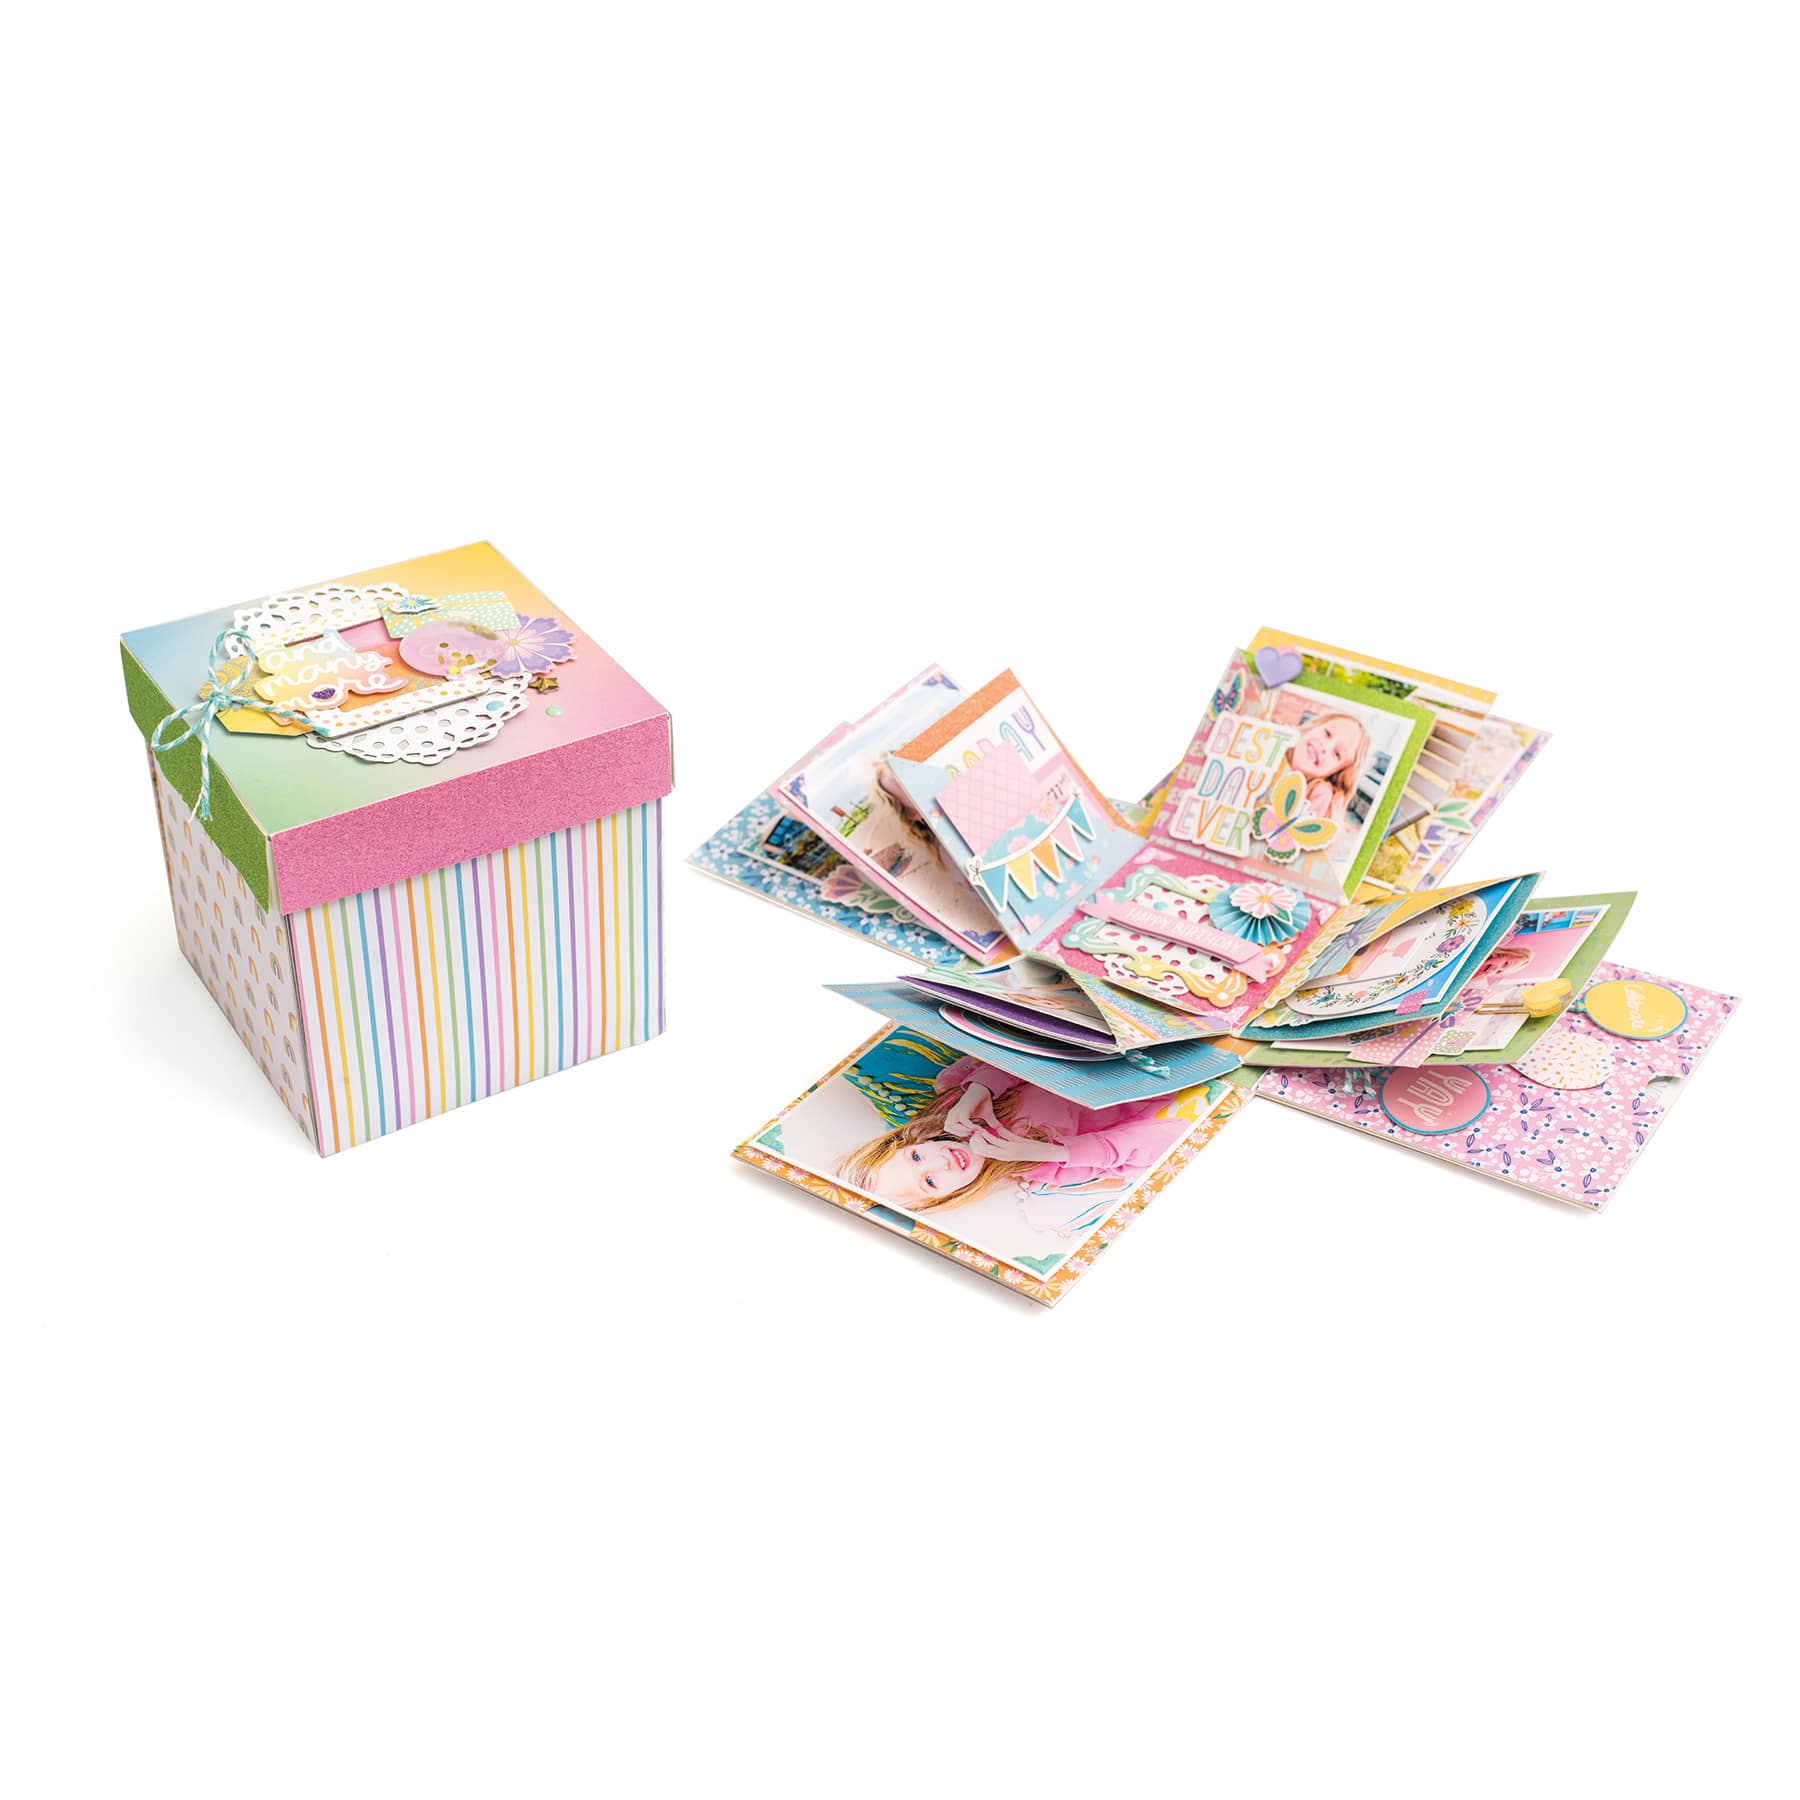 5&#x22; Kraft Memory Explosion Box by Recollections&#x2122;